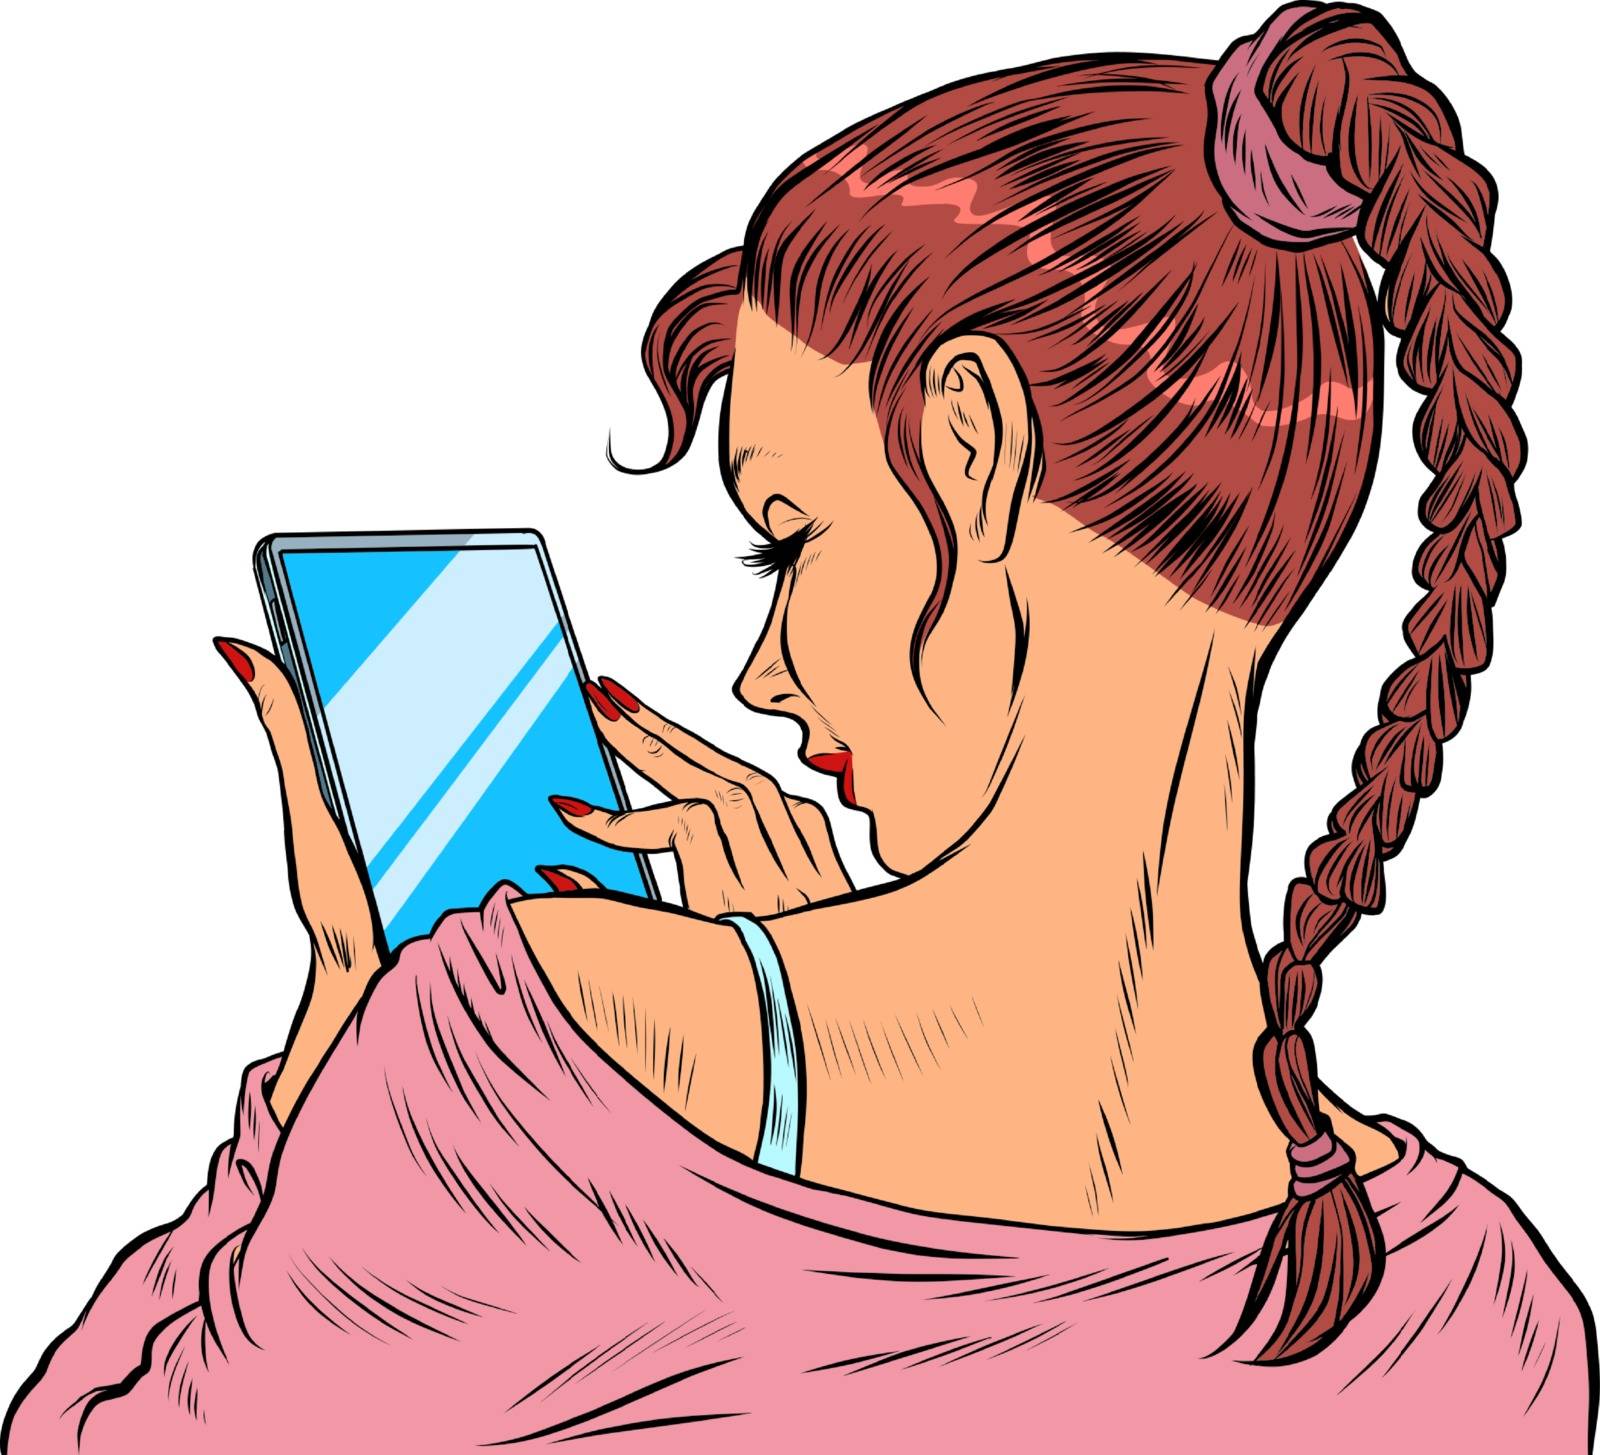 A young woman with a smartphone. Techniques and gadgets. Pop art retro vector illustration 50s 60s style